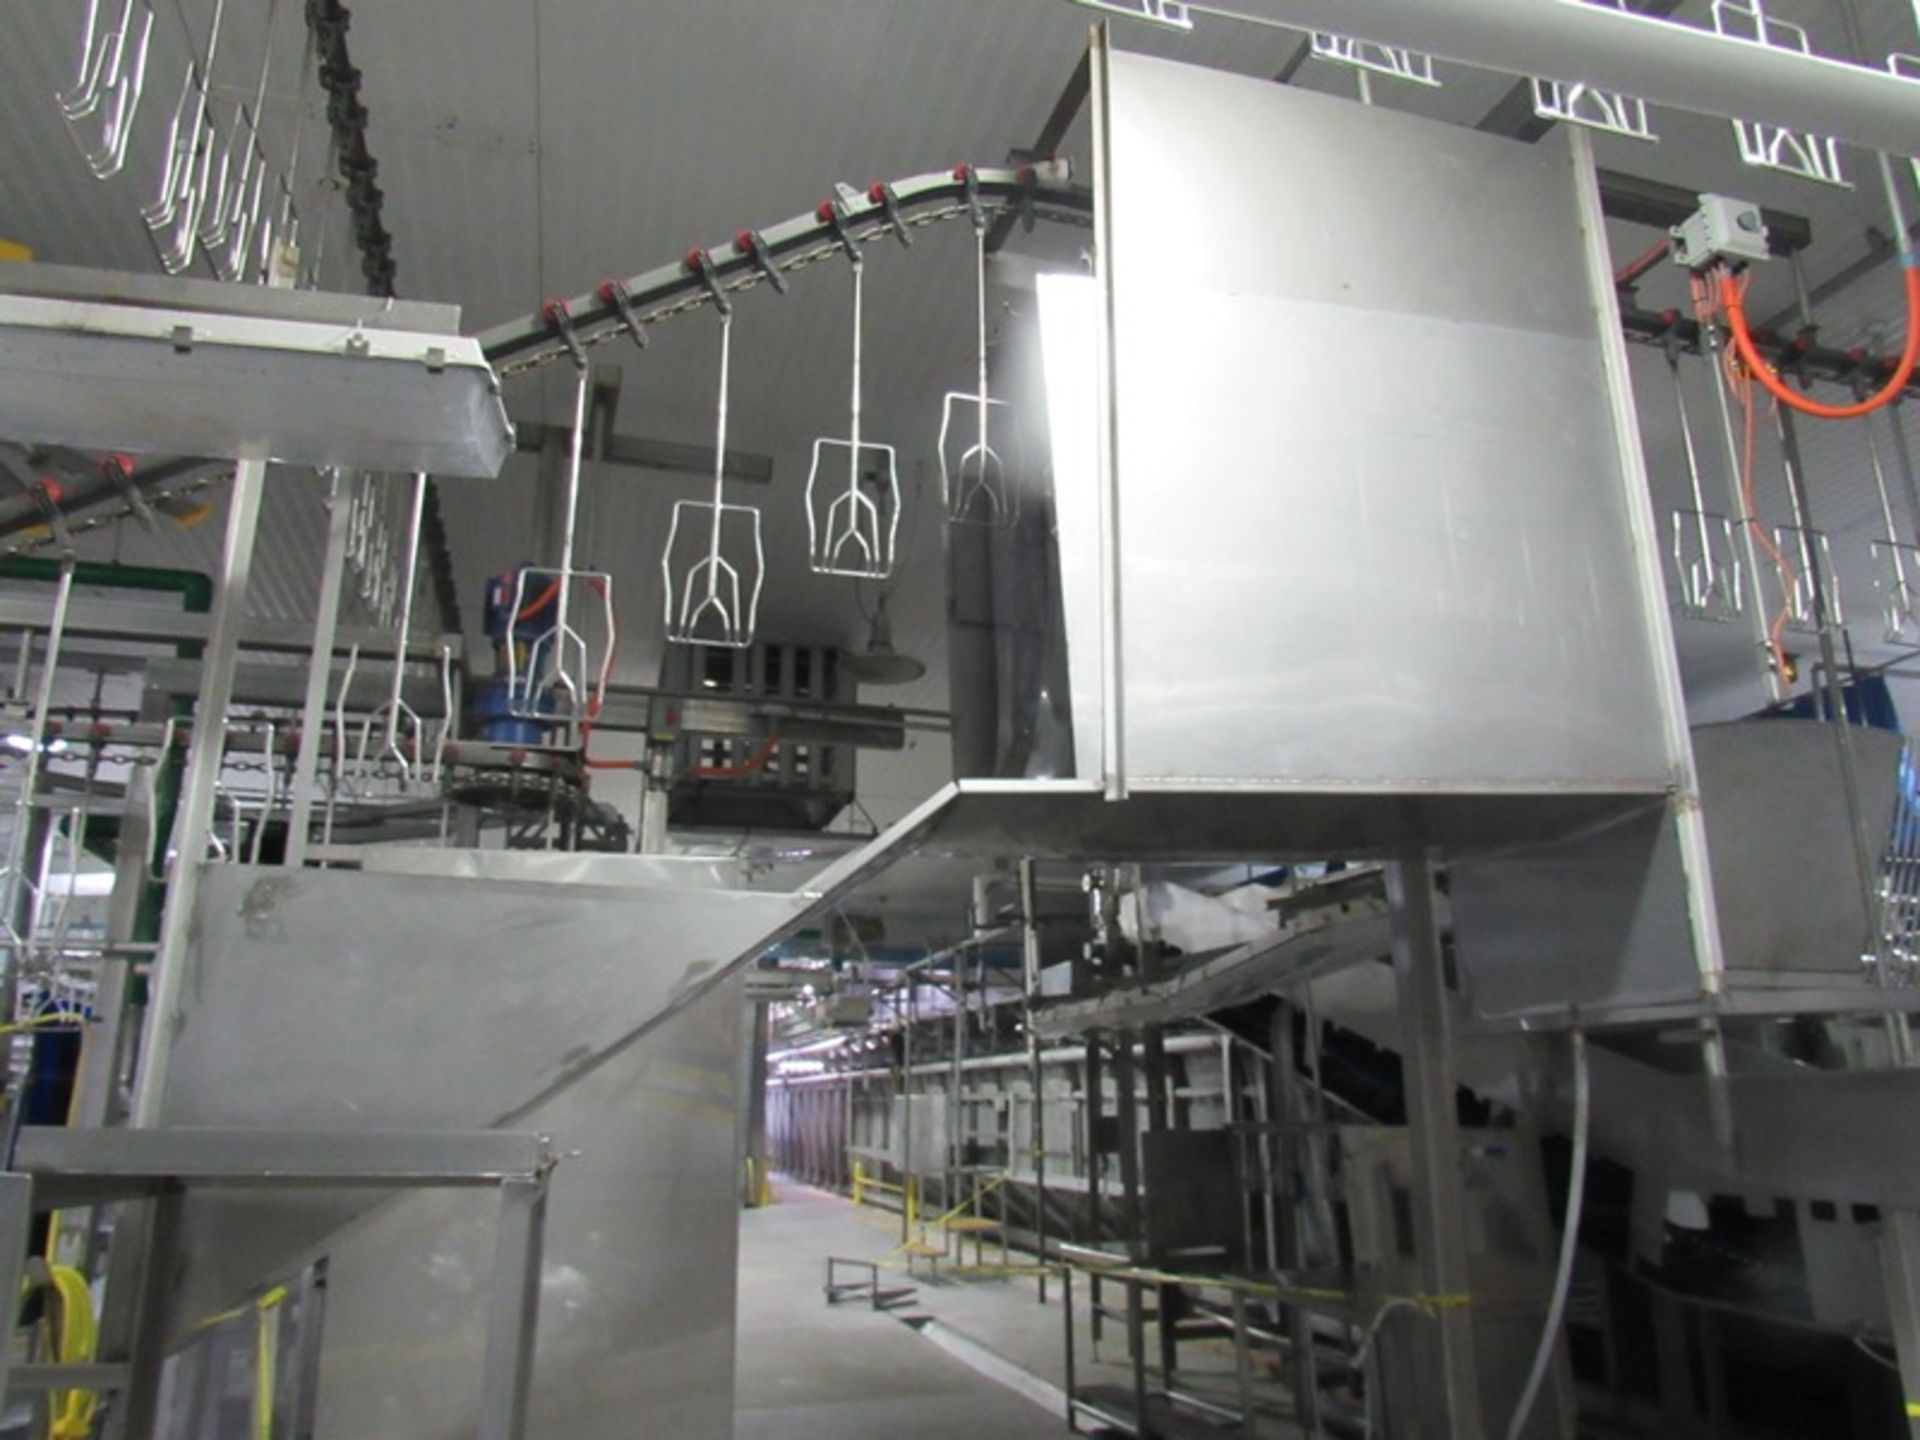 Lot Stainless Steel Structure Throughout Process Floor Overhead and Floor Level | Rig Fee: $5625 - Image 11 of 34